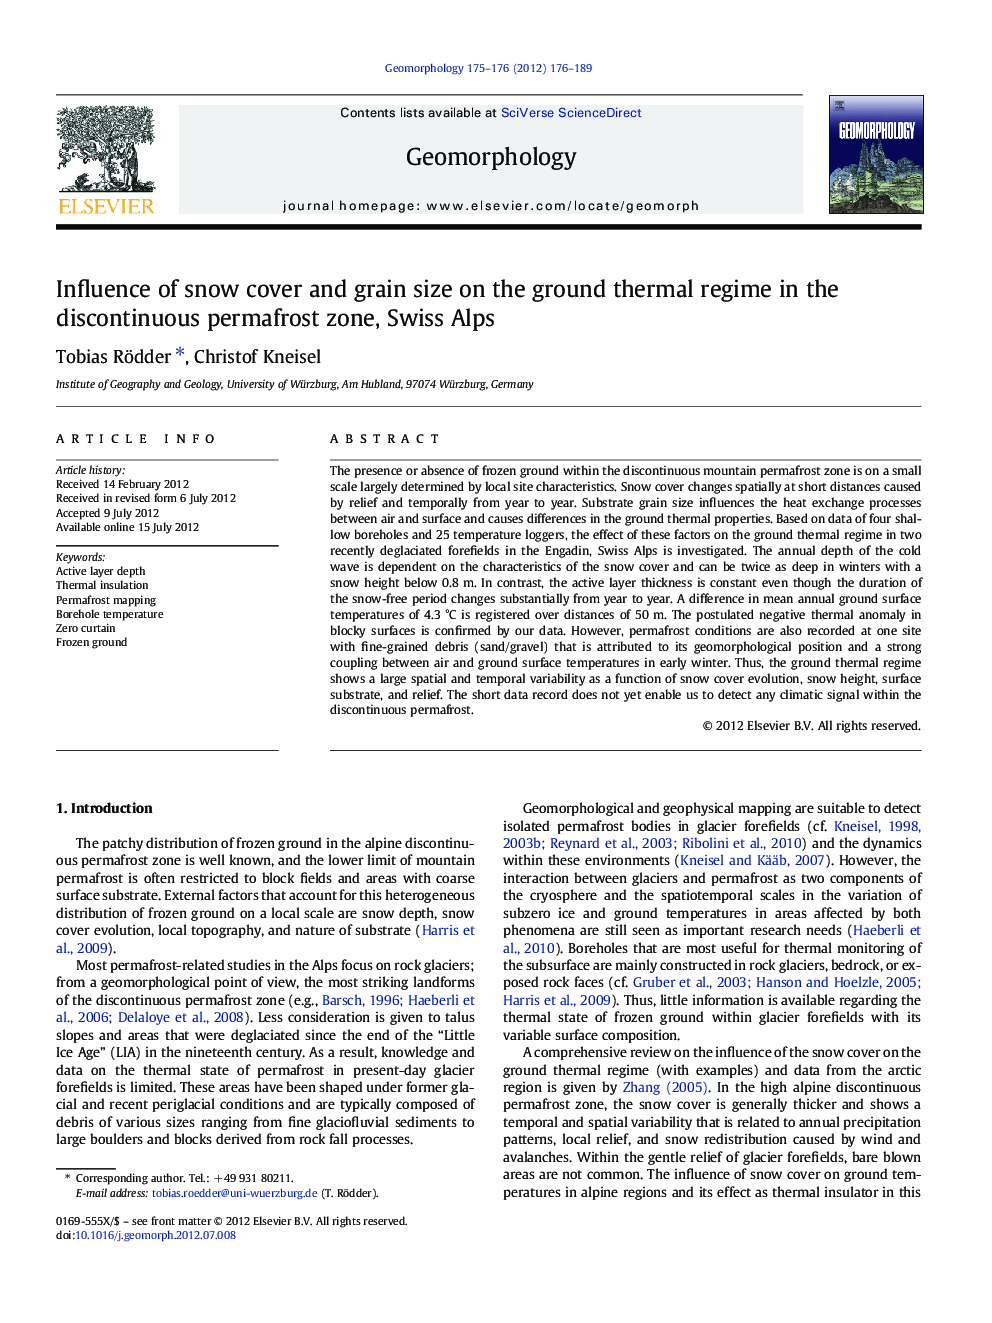 Influence of snow cover and grain size on the ground thermal regime in the discontinuous permafrost zone, Swiss Alps